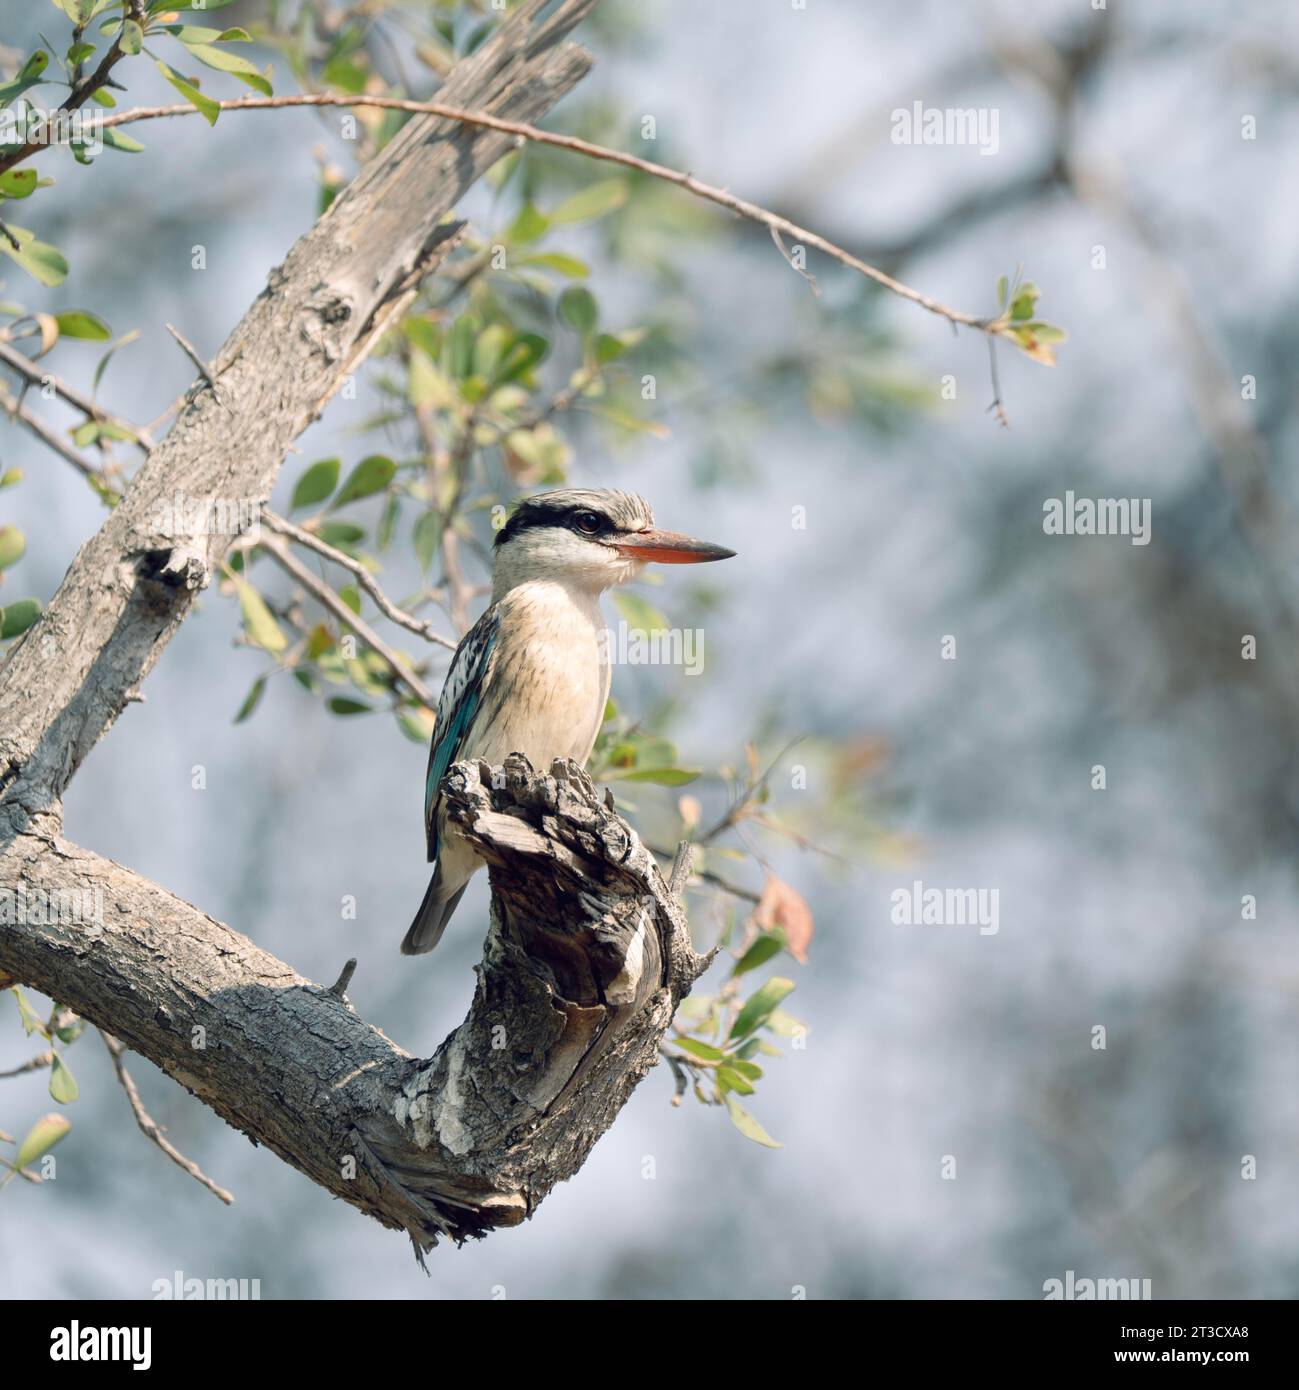 Striped kingfisher, Limpopo, South Africa Stock Photo